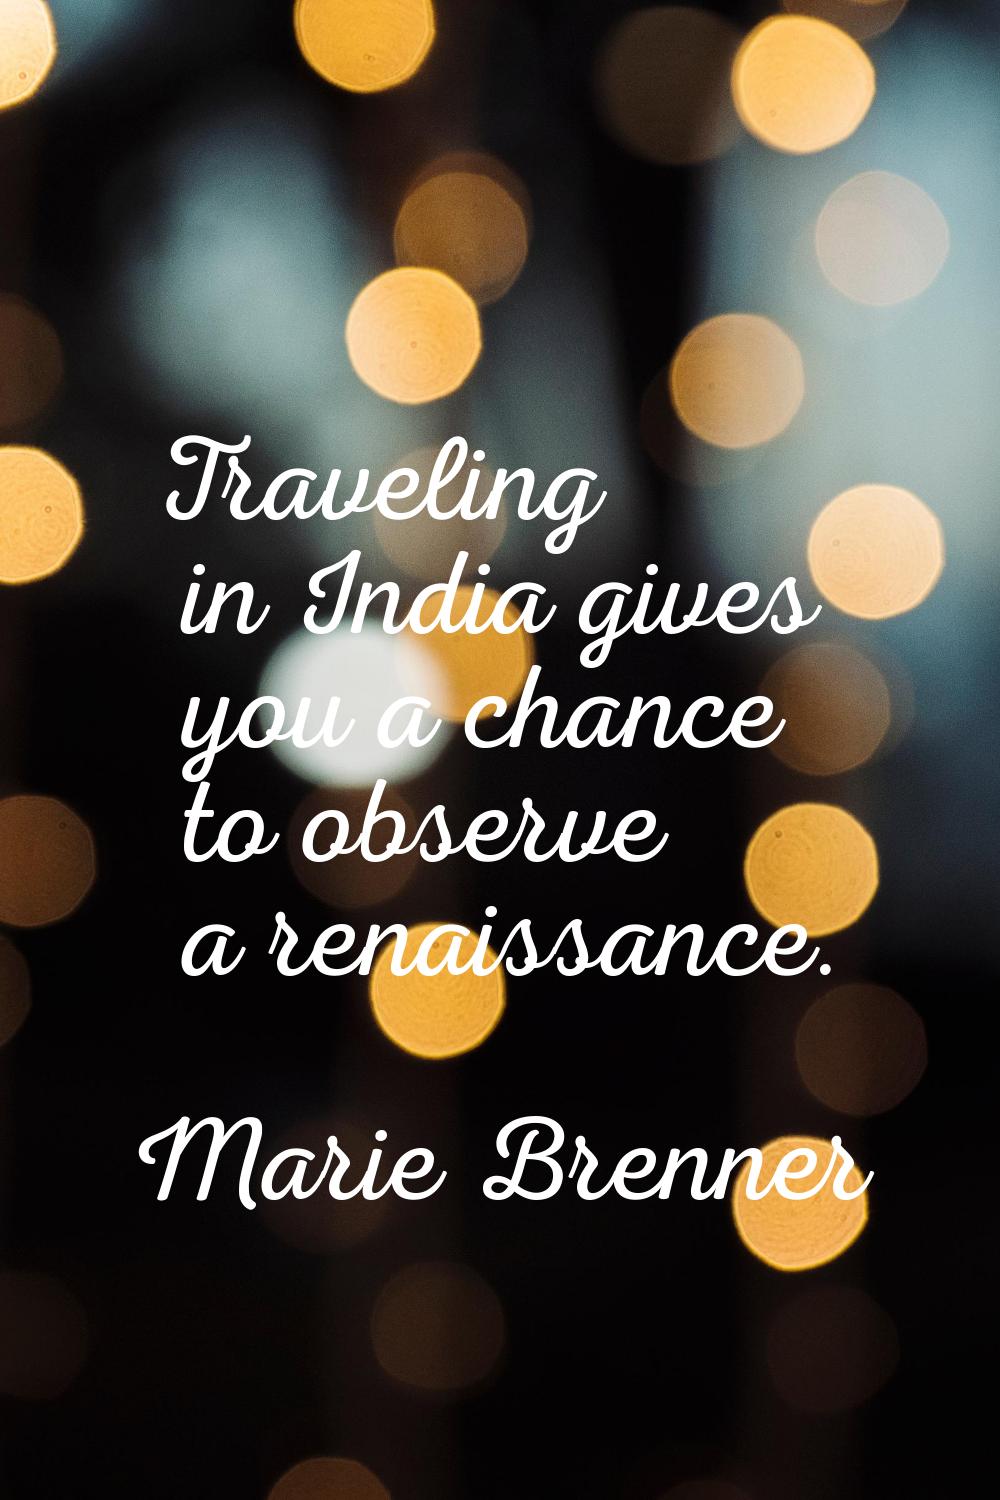 Traveling in India gives you a chance to observe a renaissance.